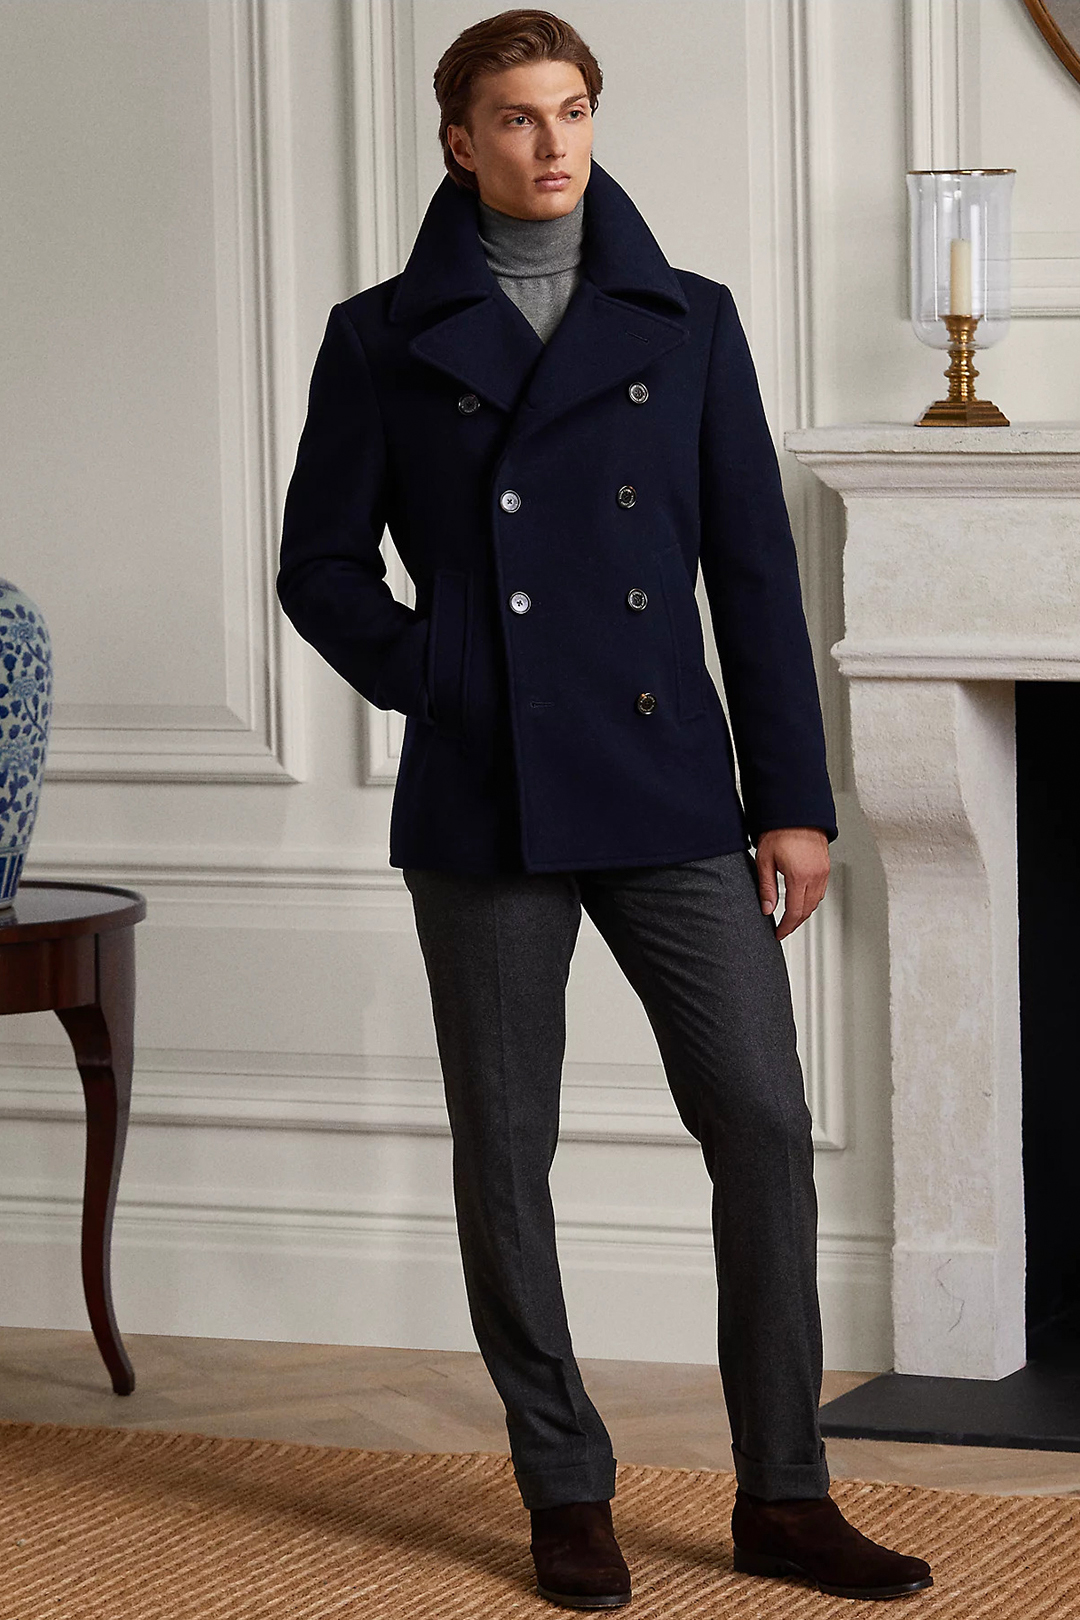 Navy pea coat, gray turtleneck, charcoal dress pants, and brown suede Chelsea boots outfit